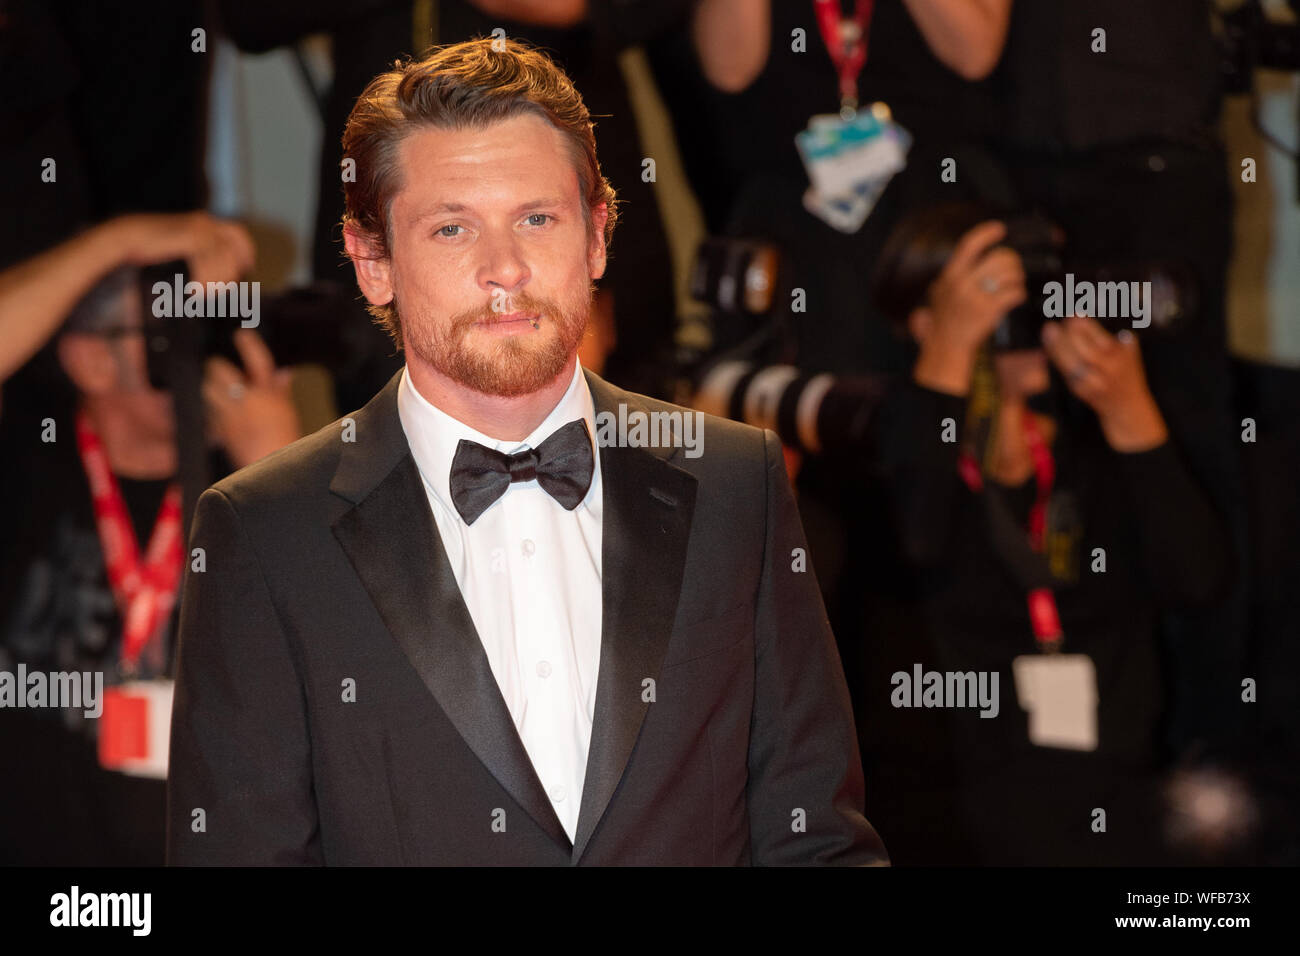 VENICE, Italy. 30th Aug, 2019. Jack O'Connell walks the red carpet for the World Premiere of 'Seberg' during the 76th Venice Film Festival at Palazzo del Cinema on August 30, 2019 in Venice, Italy. Credit: Roberto Ricciuti/Awakening/Alamy Live News Stock Photo